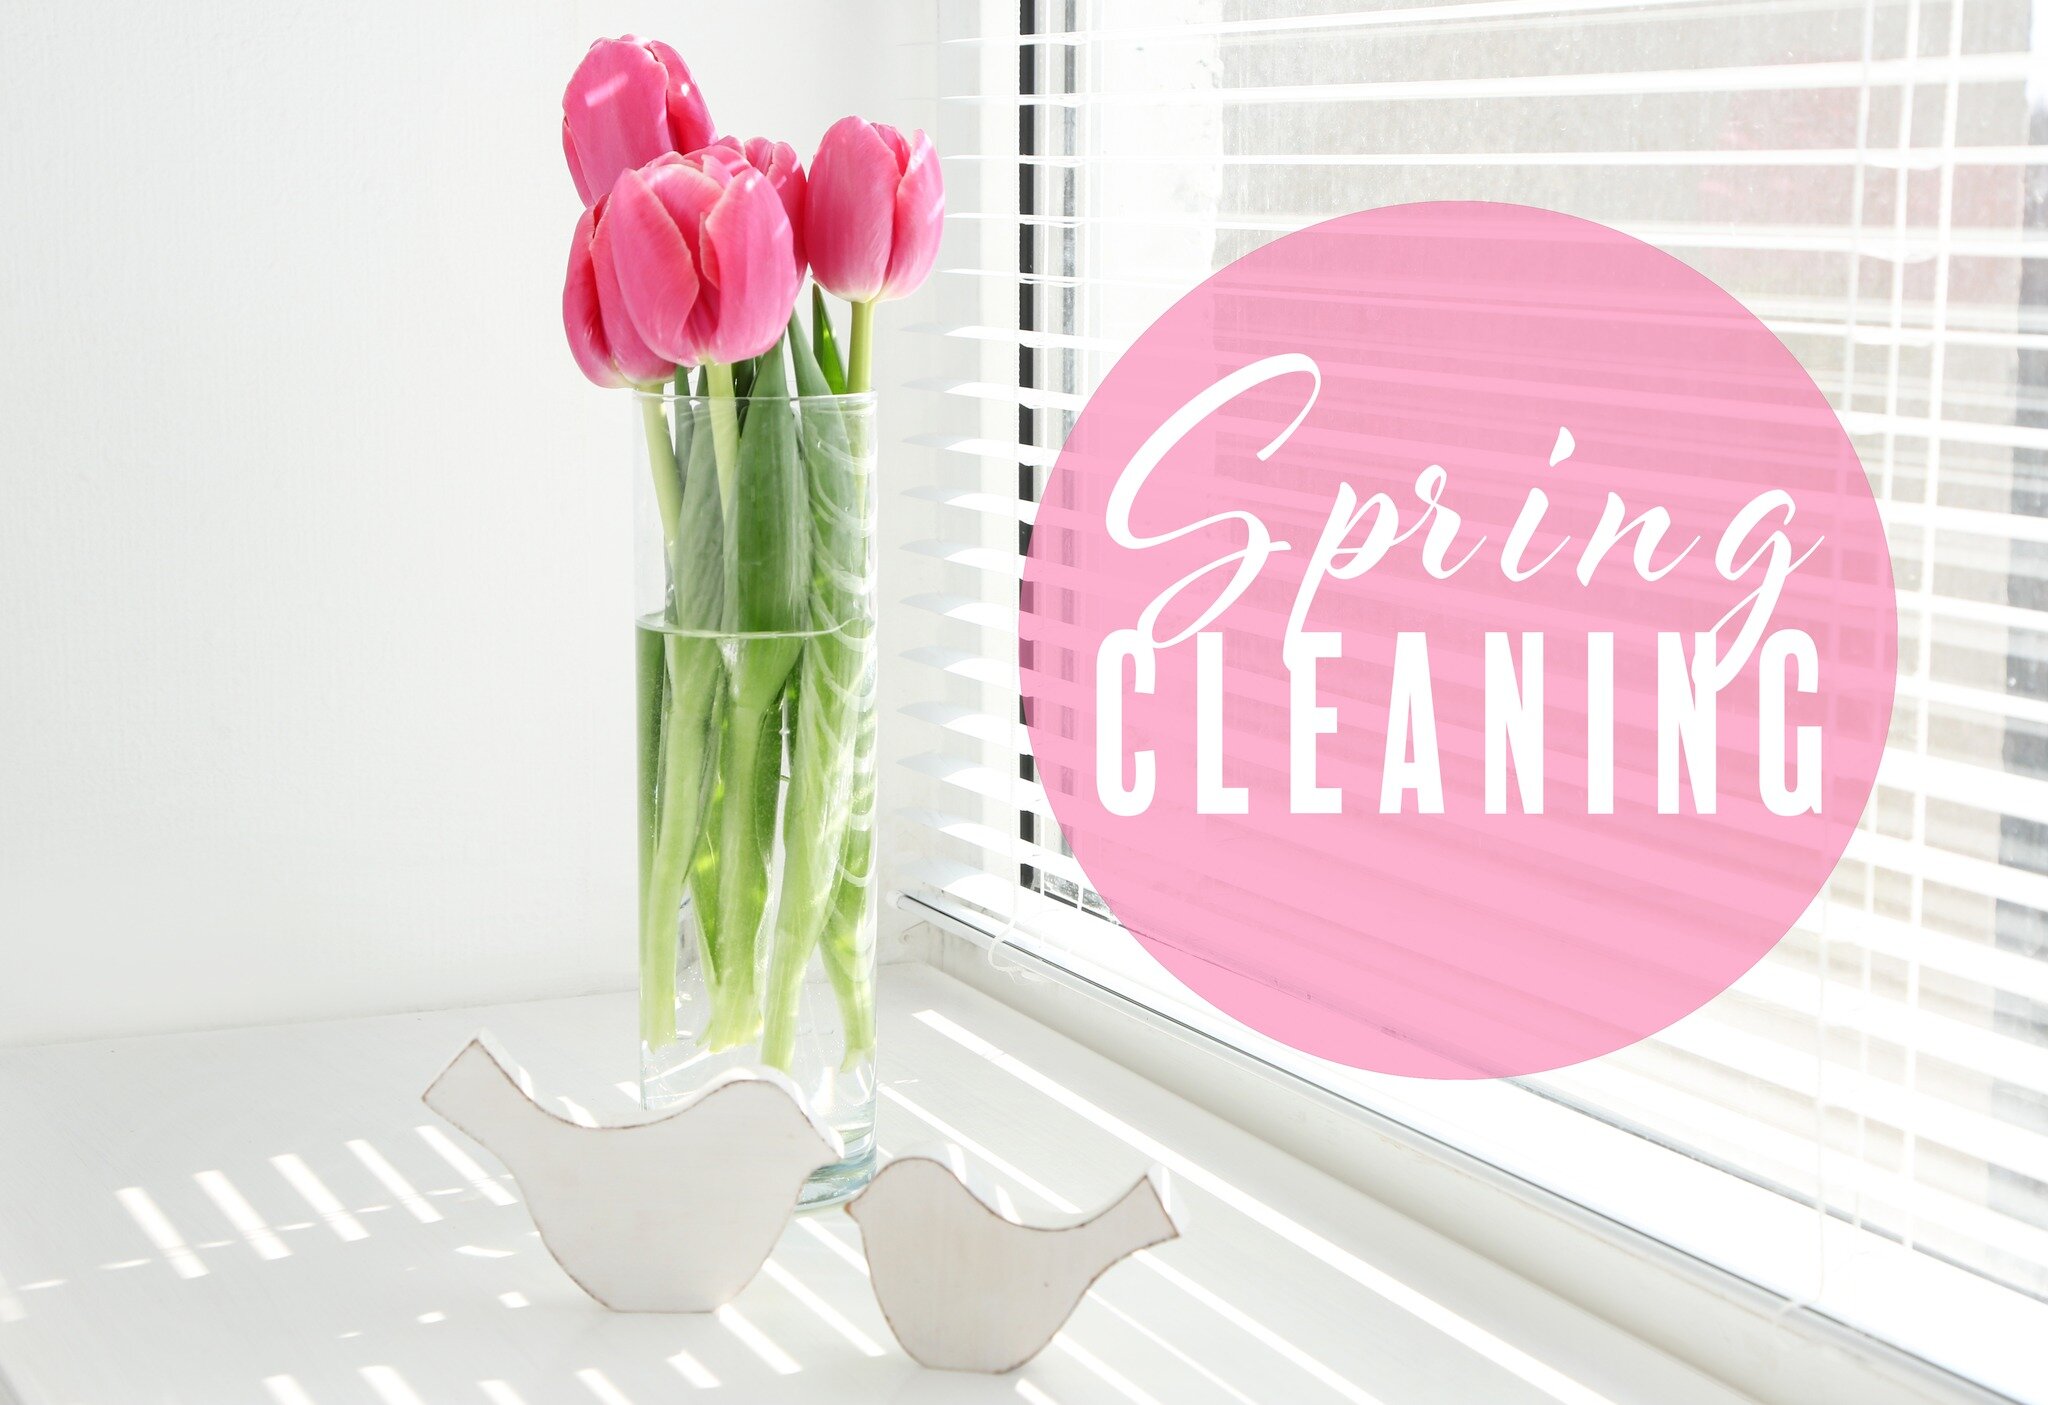 🌼🏠 Spring into a Fresh Start with The Sleek Easy Clean! 🌷✨

At The Sleek Easy Clean, we know how important it is to give your home or office a good spring clean. Our team makes sure everything is spick and span, leaving your space feeling fresh an